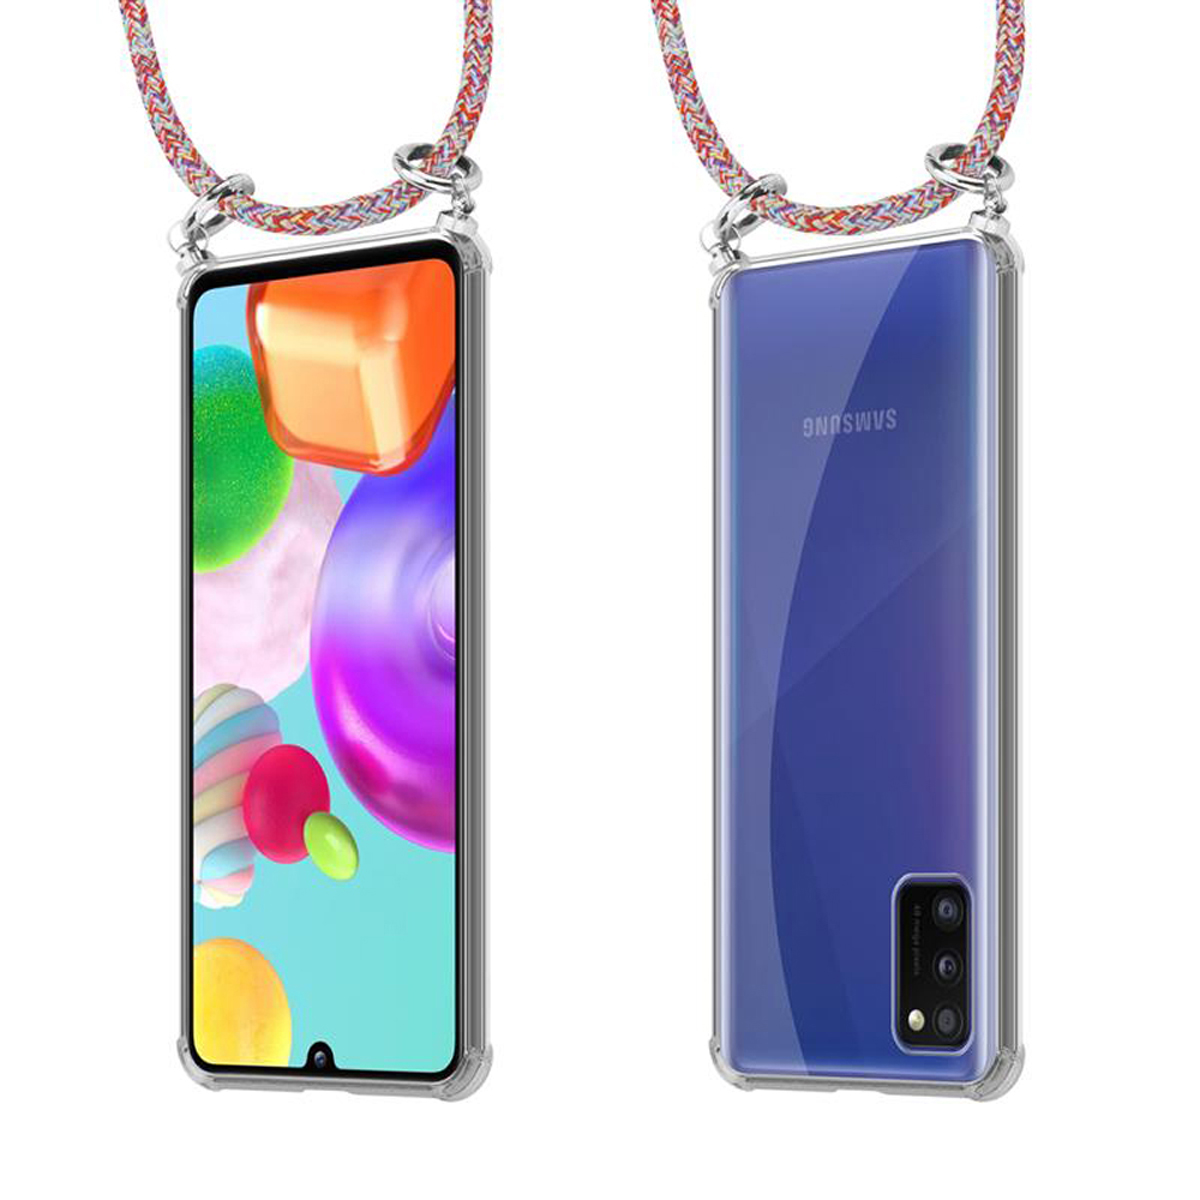 mit A41, Hülle, Samsung, Band und COLORFUL Silber Galaxy Handy Kette PARROT Kordel Ringen, Backcover, abnehmbarer CADORABO